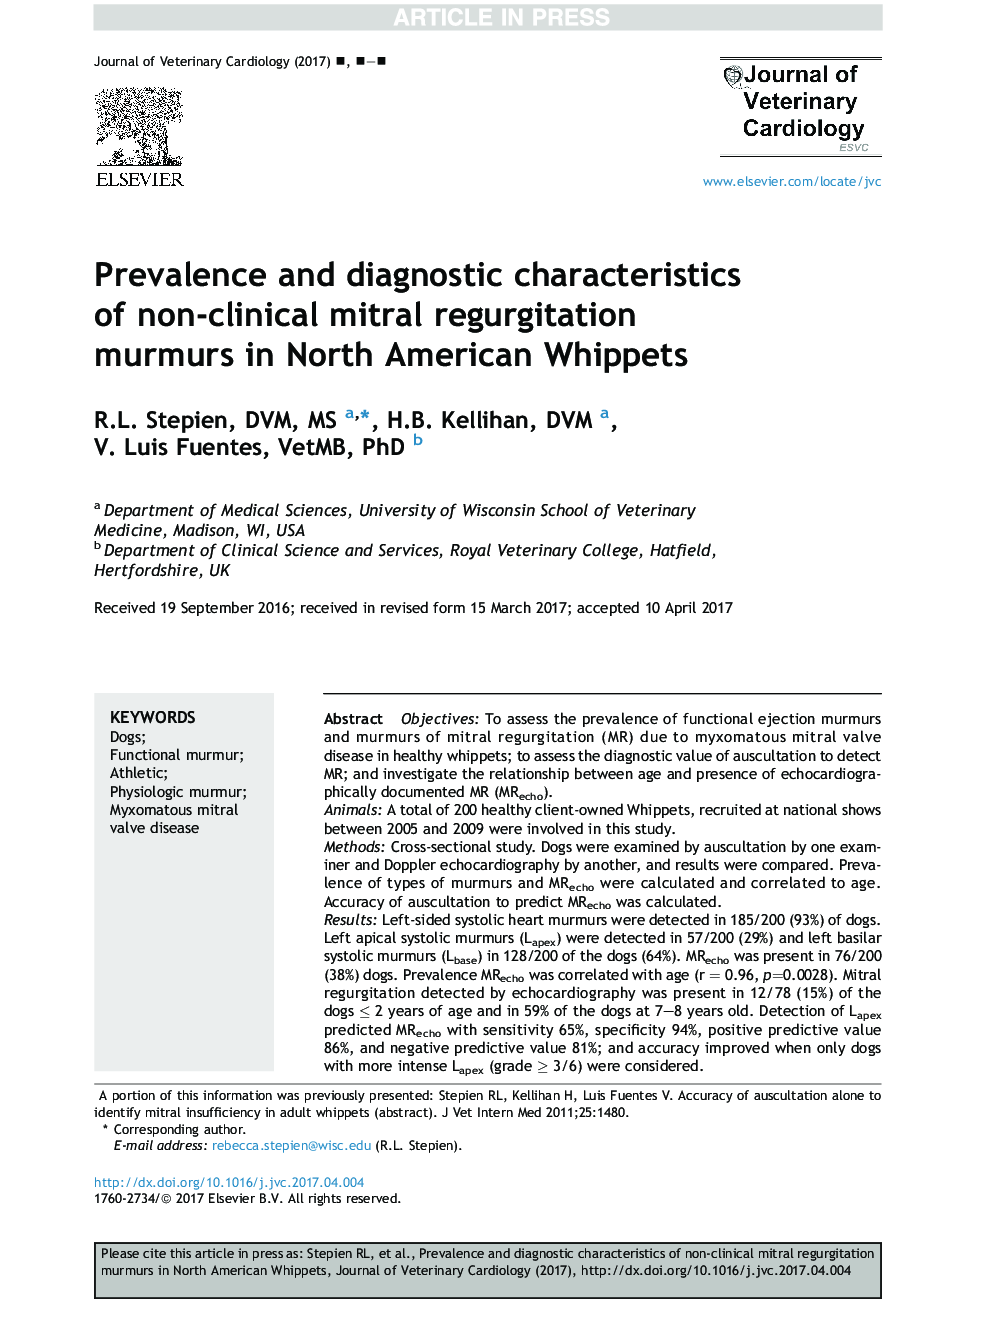 Prevalence and diagnostic characteristics of non-clinical mitral regurgitation murmurs in North American Whippets